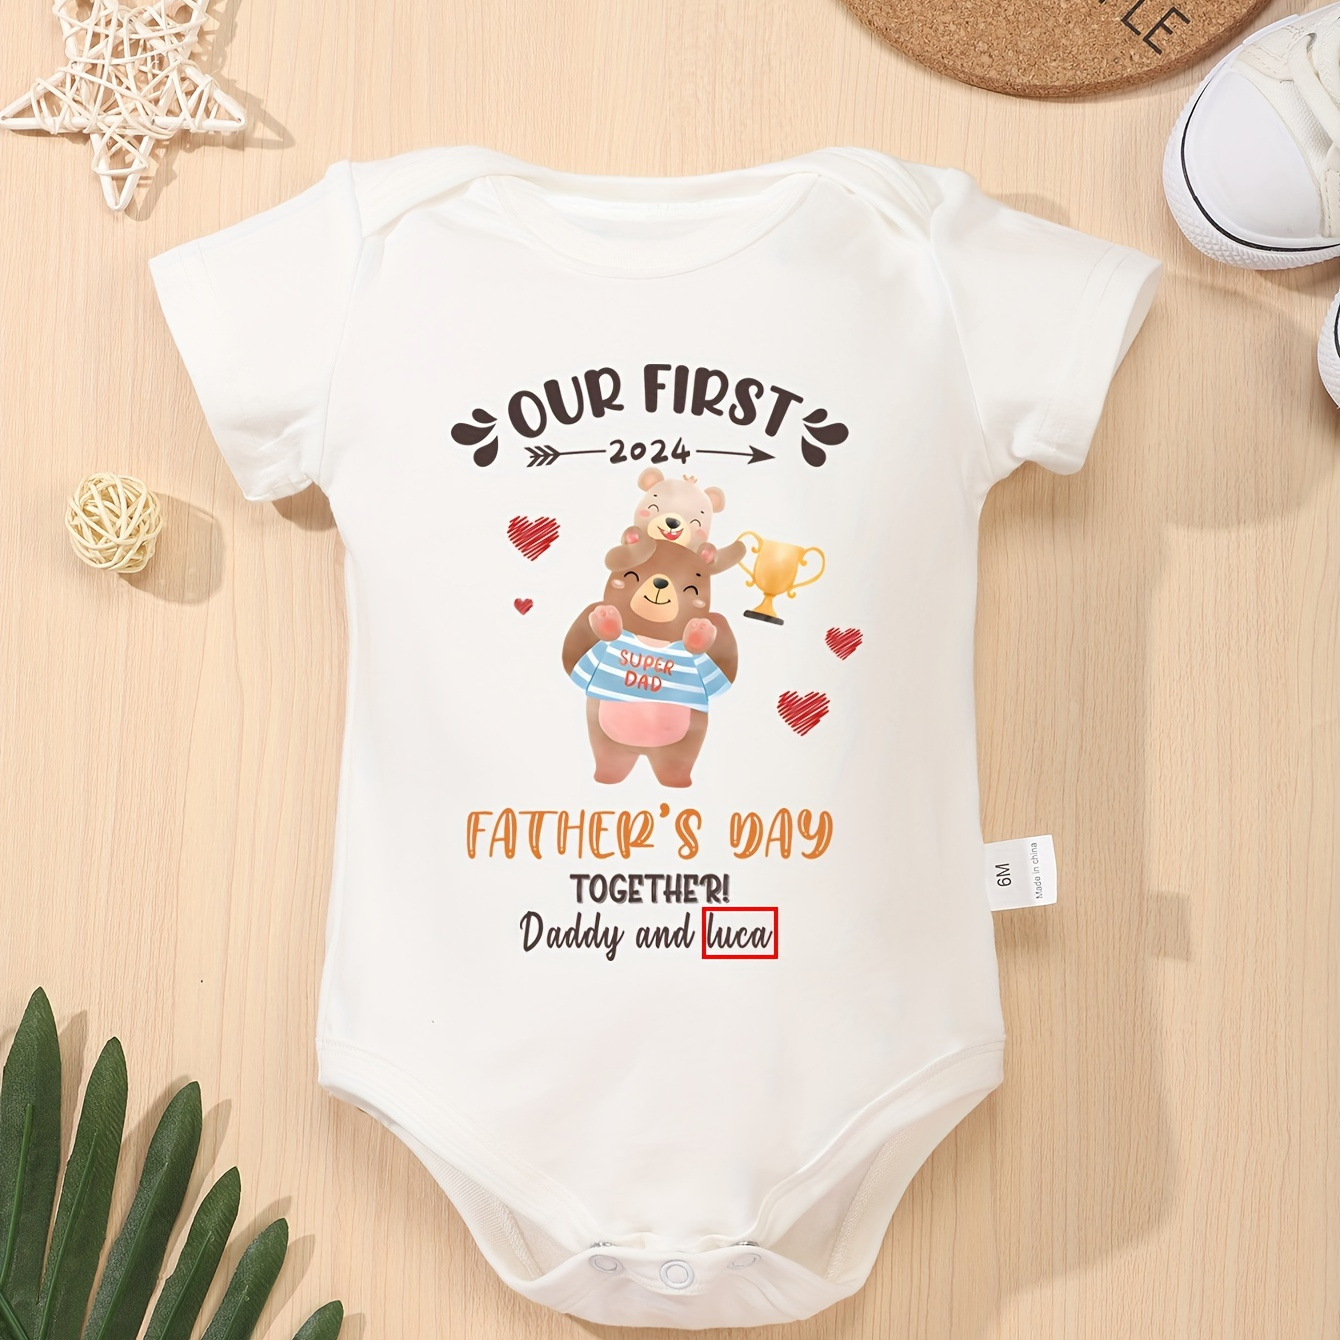 

Our 1st Father's Day Together & Customized Text & Bears Print Baby Boys & Girls Personalized Cotton Bodysuit Onesie, Cozy Short Sleeve Jumpsuit Romper Top Newborn Gifts